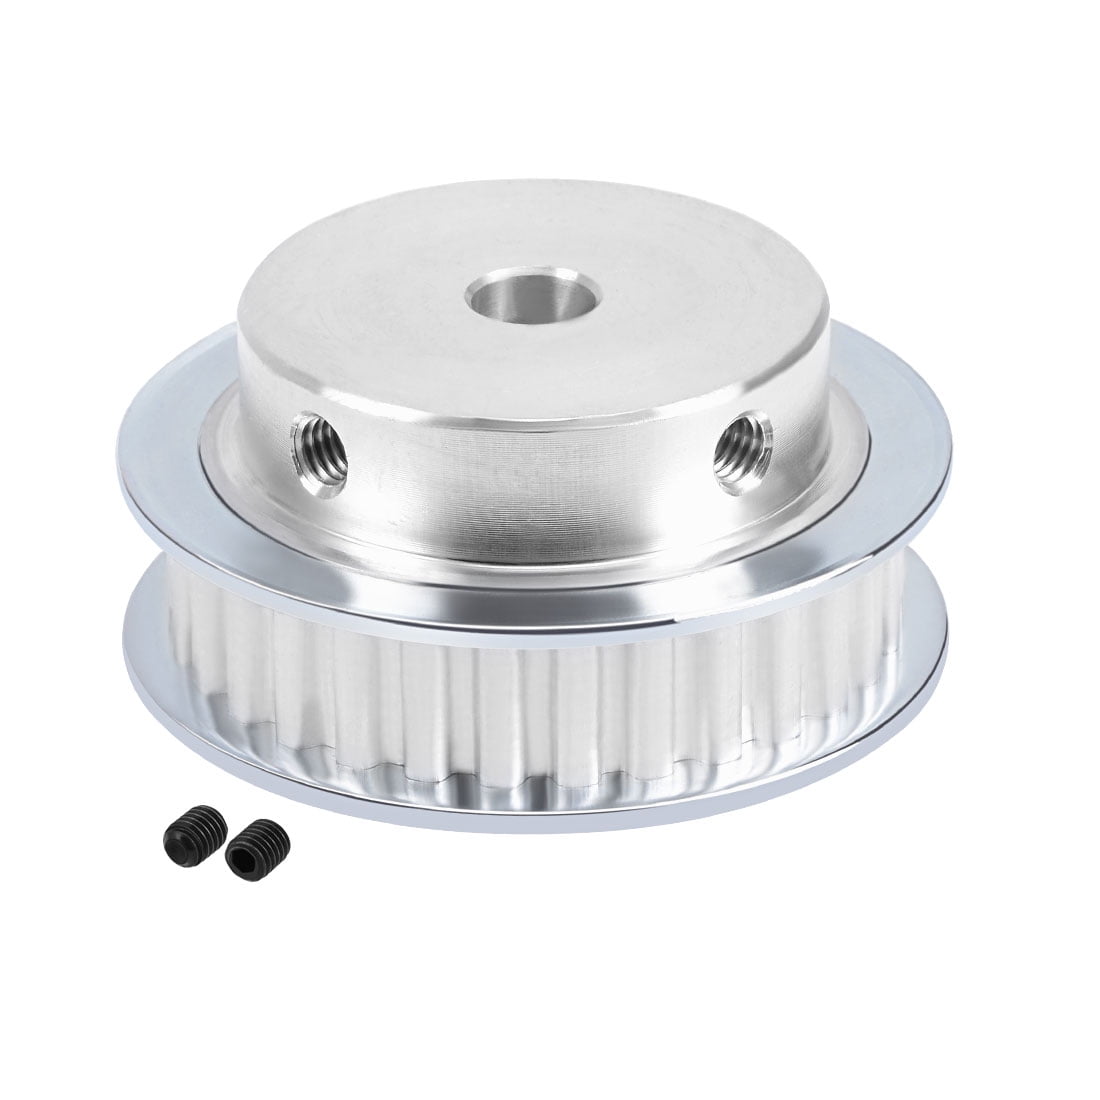 uxcell Aluminum XL 15 Teeth 6mm Bore Timing Belt Idler Pulley Flange Synchronous Wheel for 10mm Belt 3D Printer CNC 